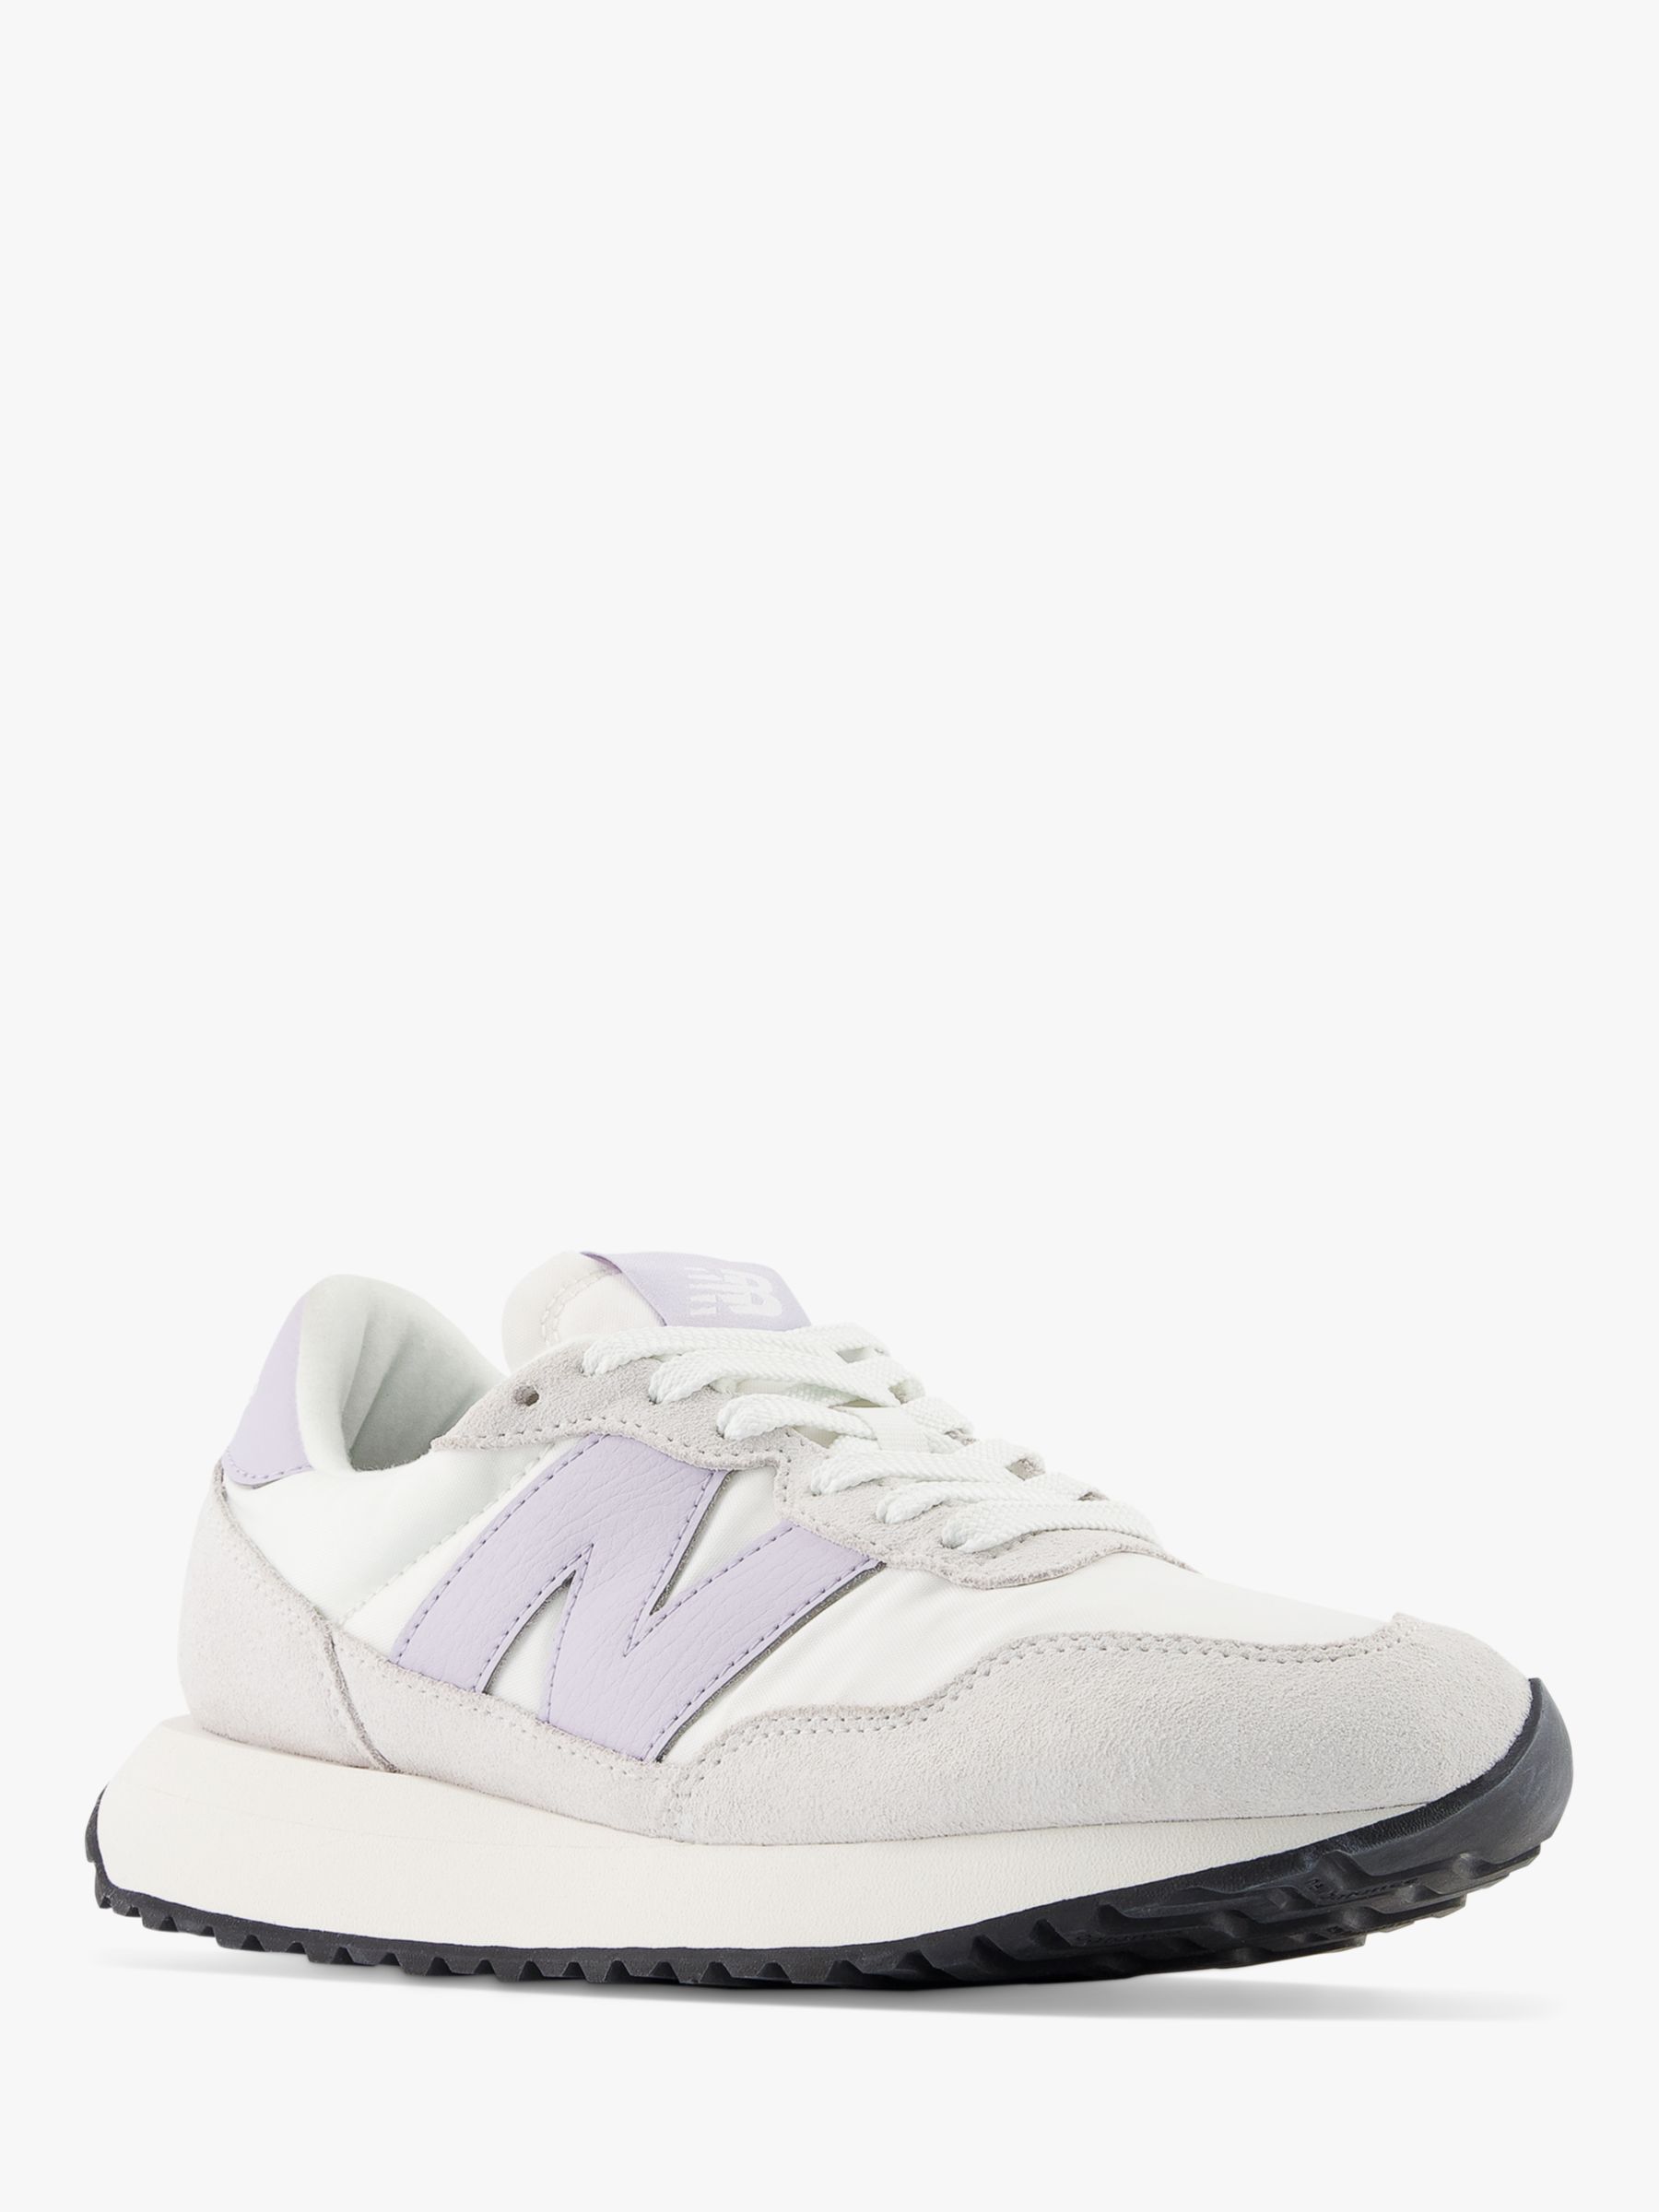 New Balance 237 Suede Mesh Trainers